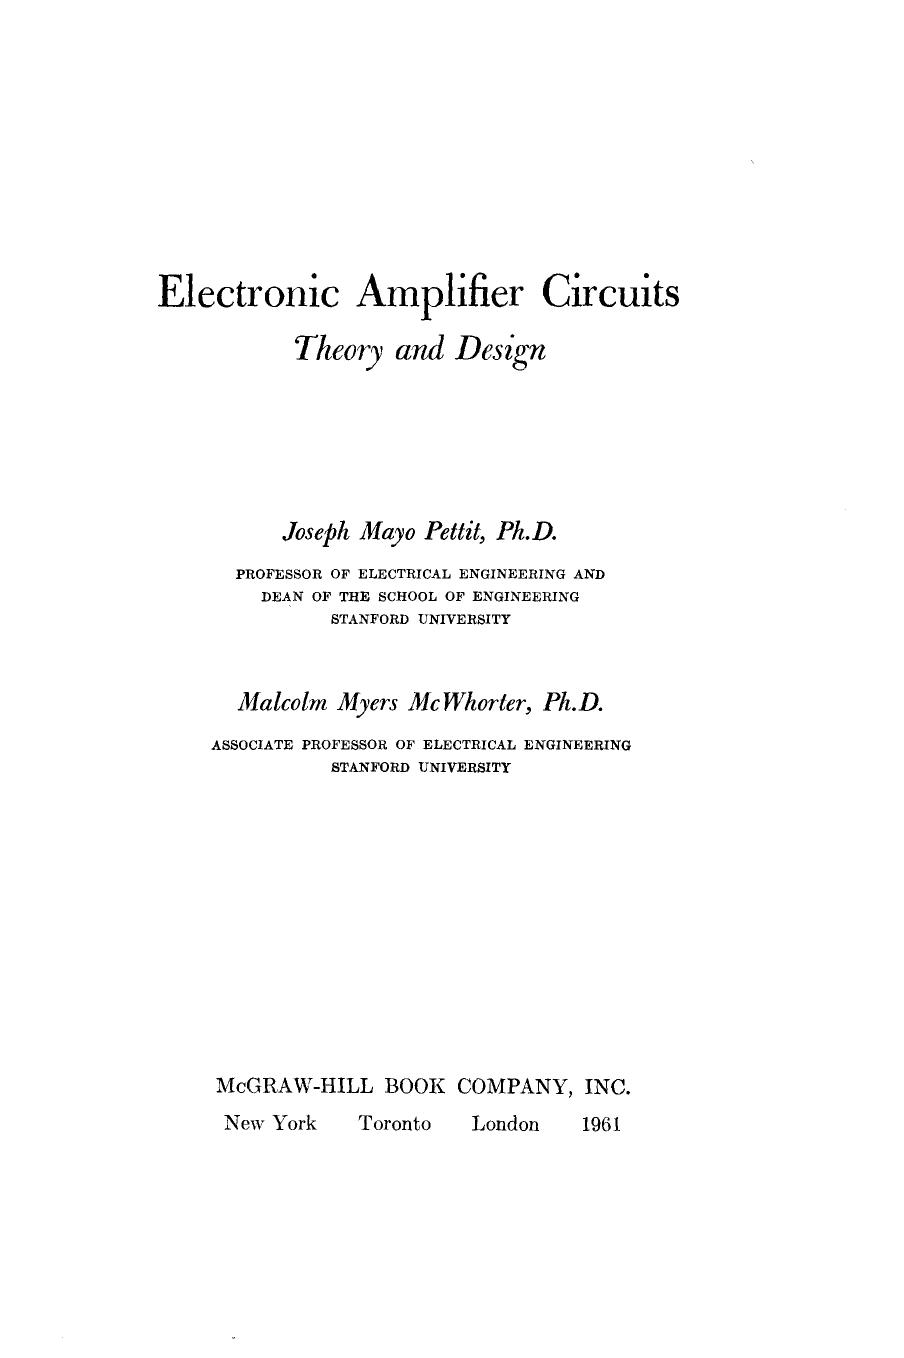 intro electronic amplifiers